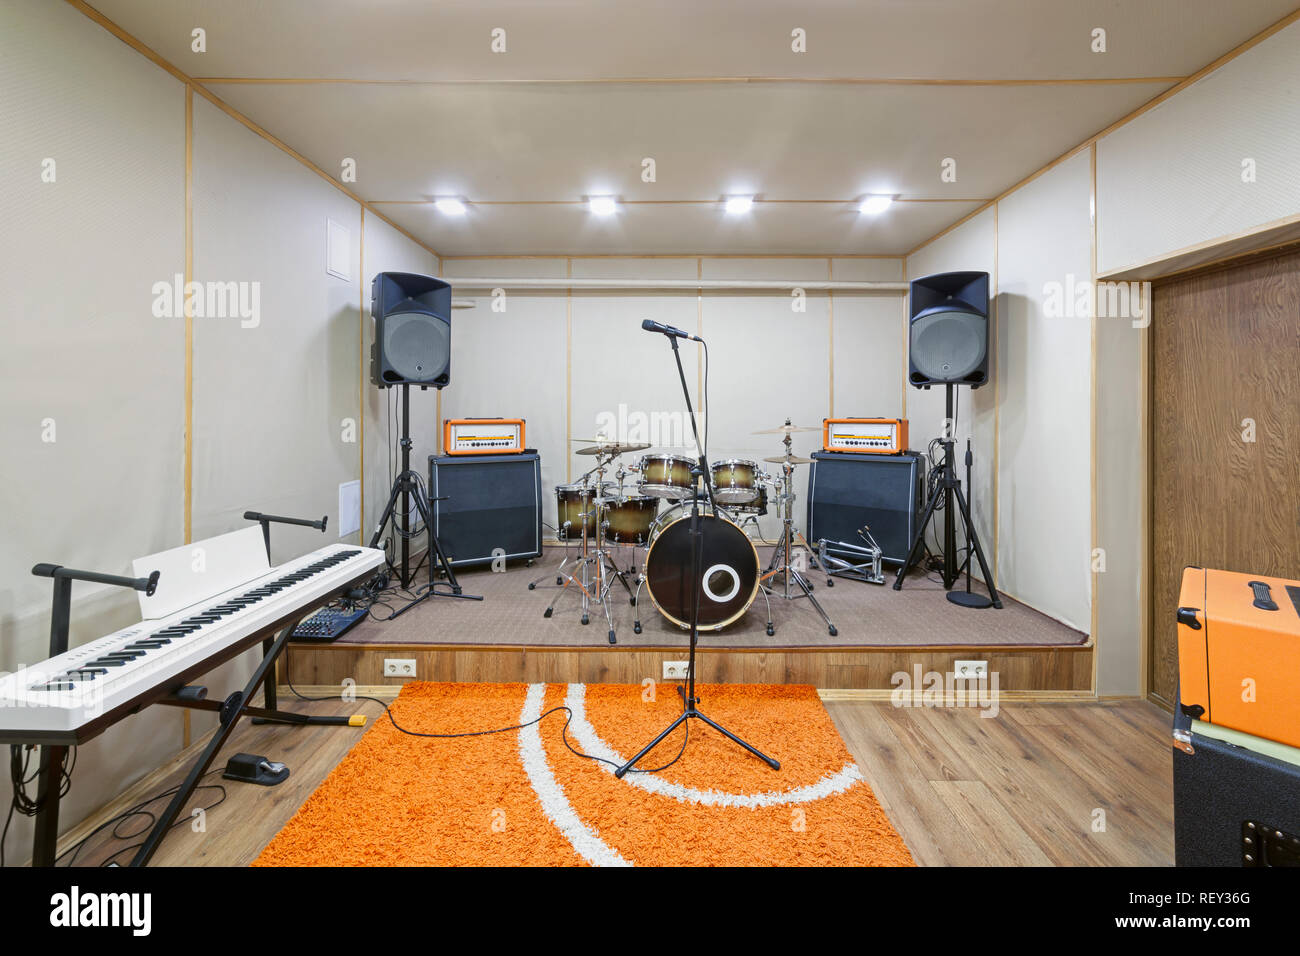 Music rehearsal space with drum kit and musical equipment. Stock Photo